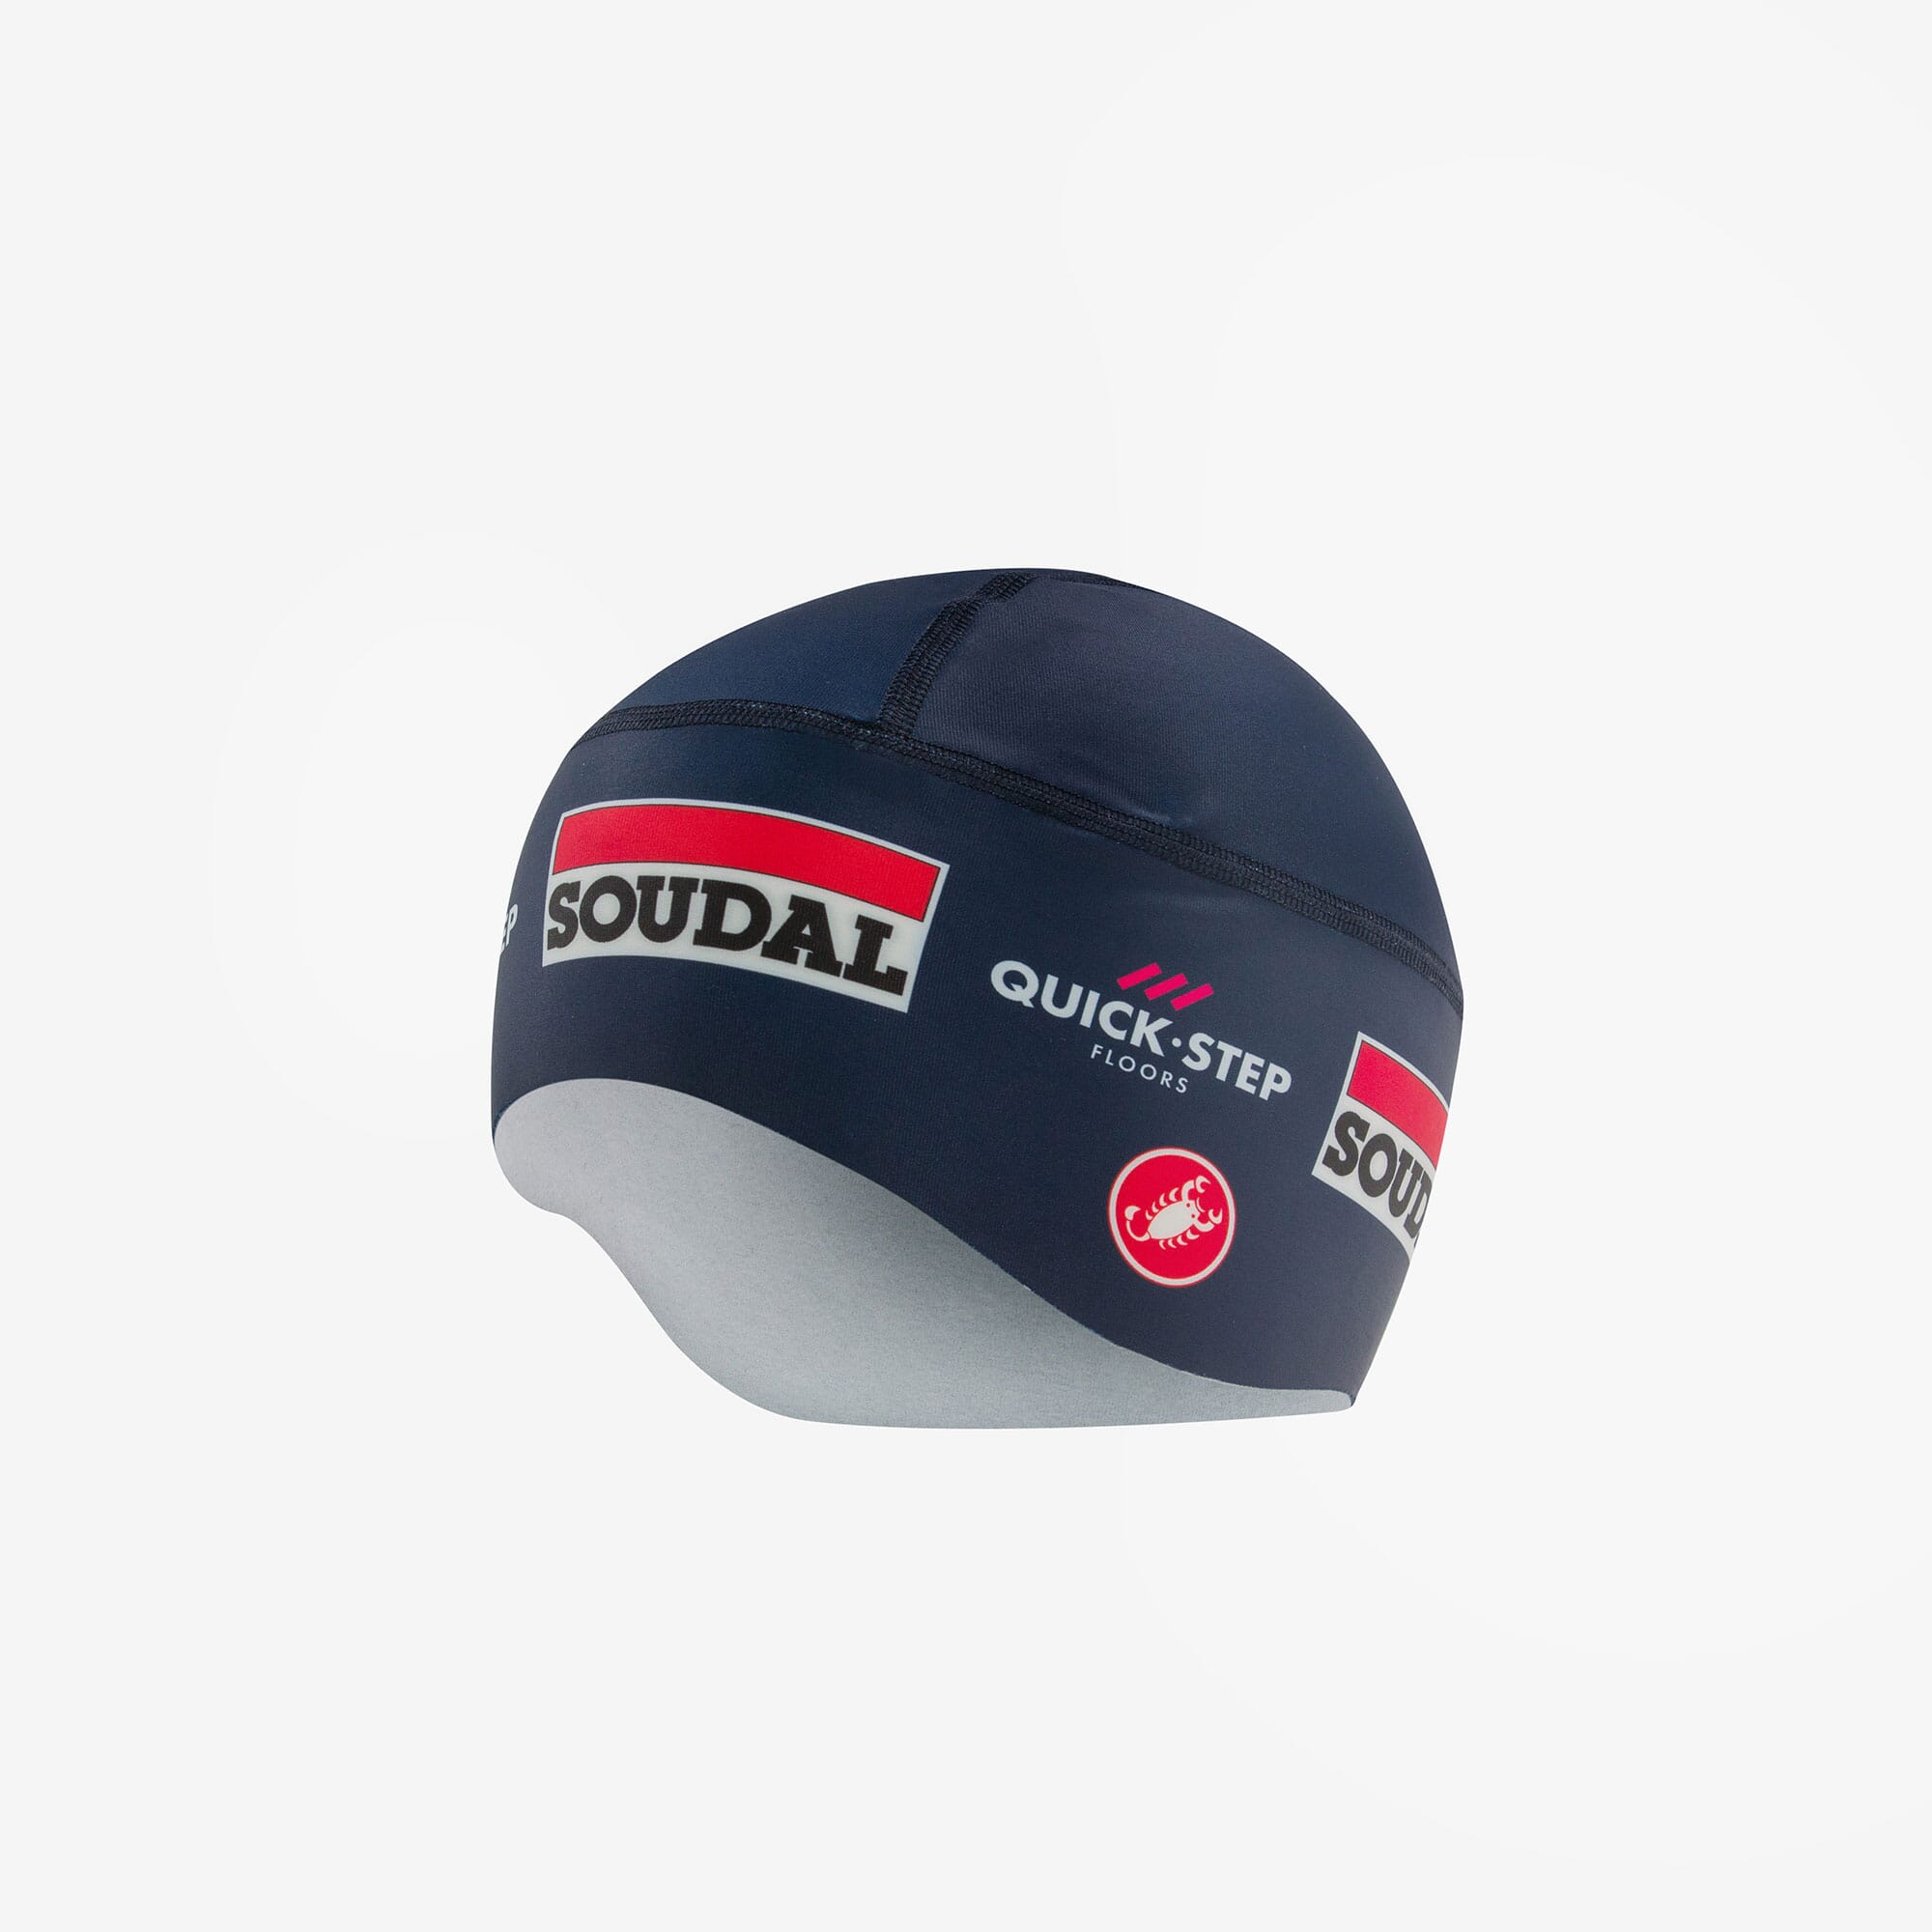 Castelli Soudal Quick-Step Pro Thermal Skully